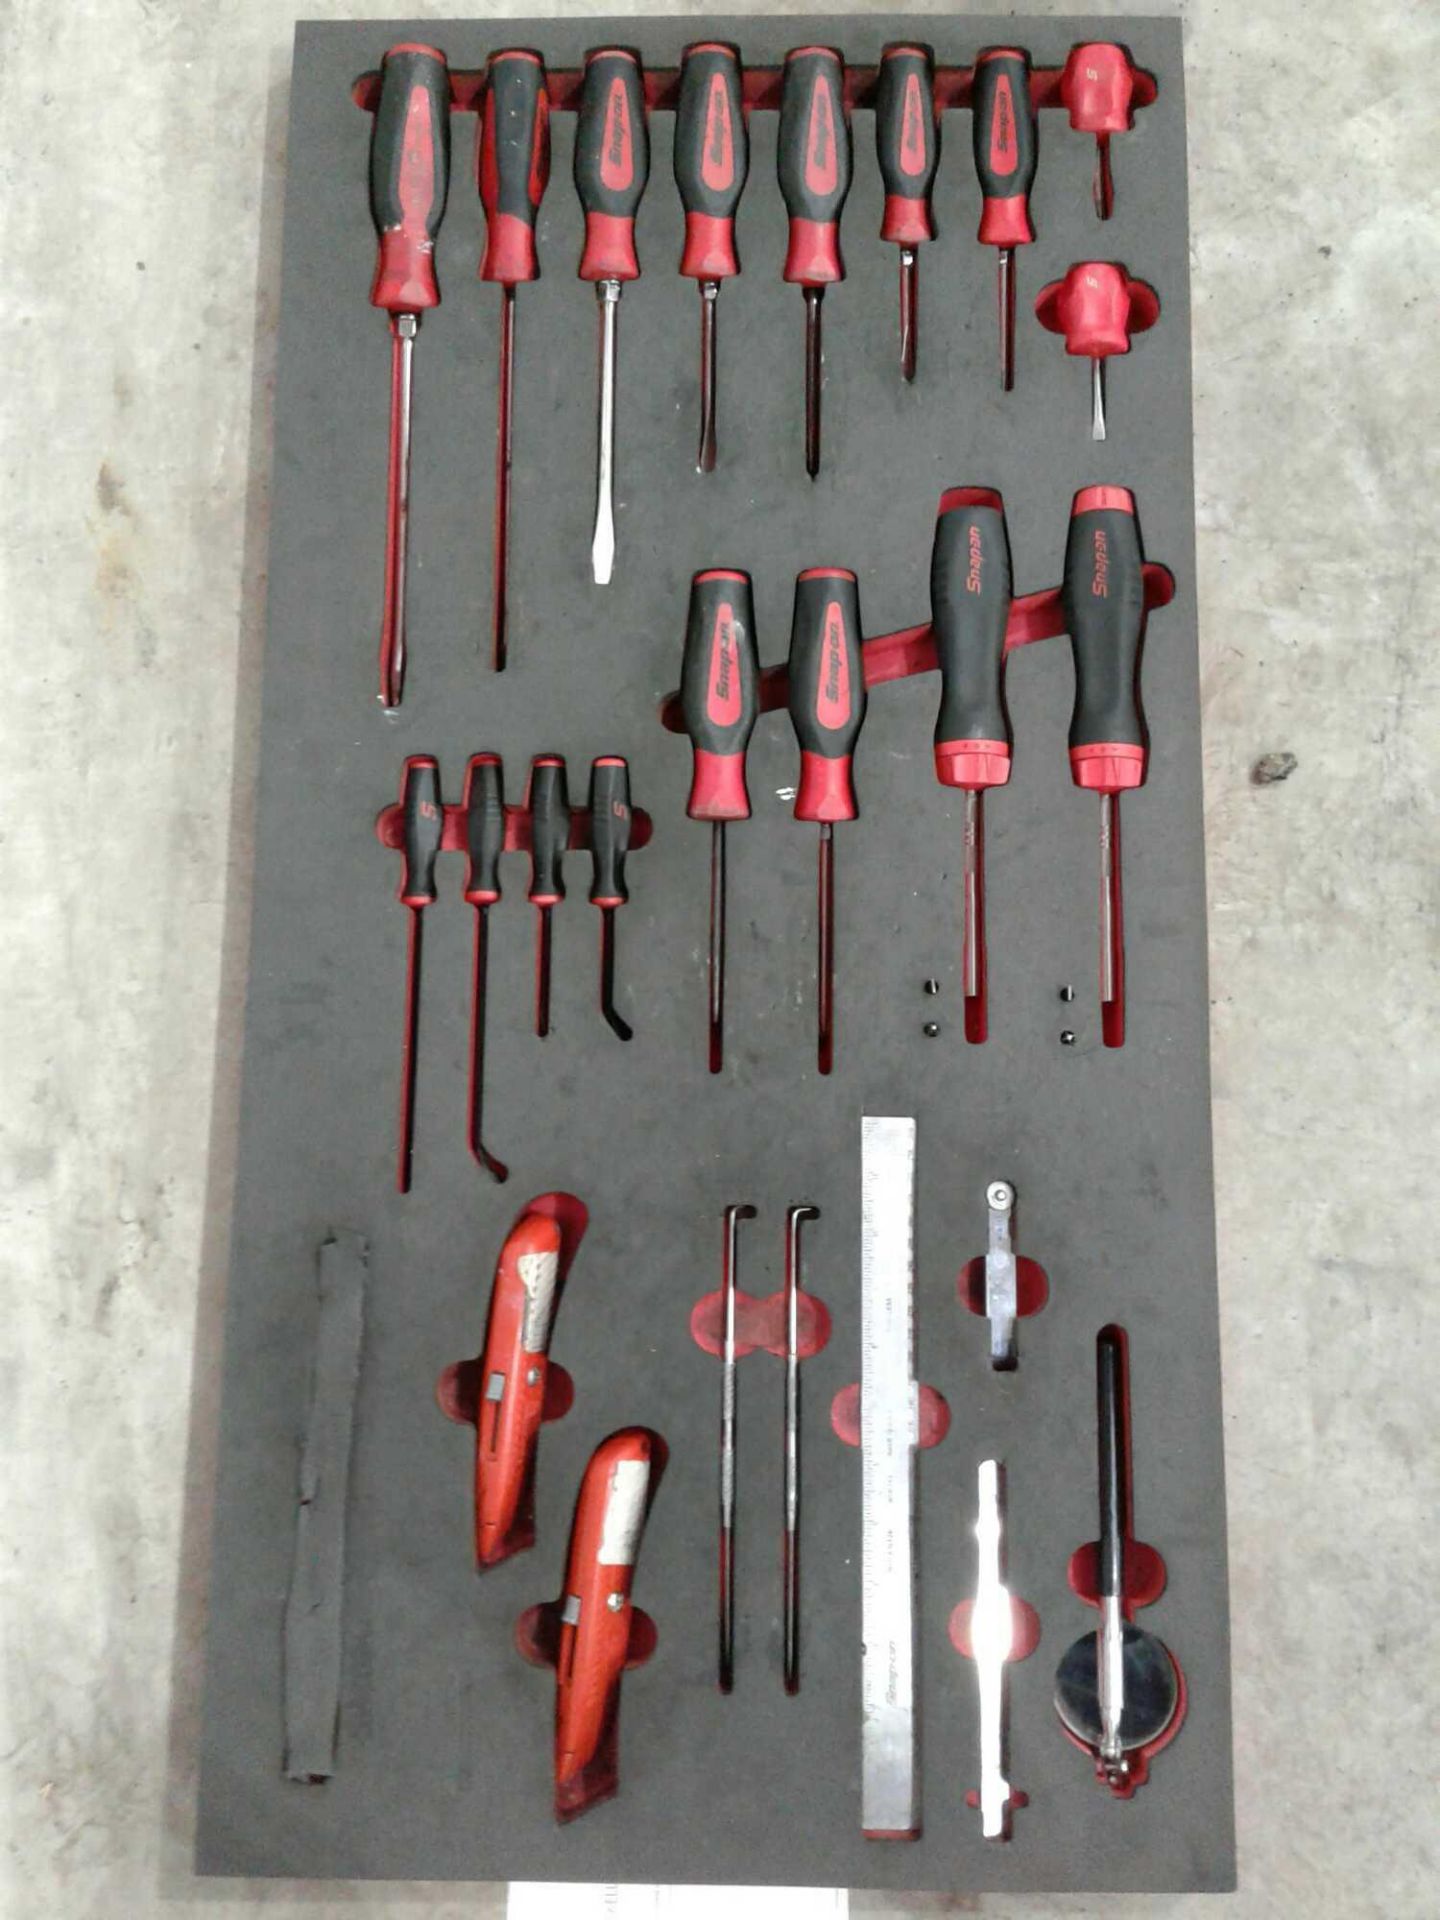 Snap on screw driver set - Image 2 of 2